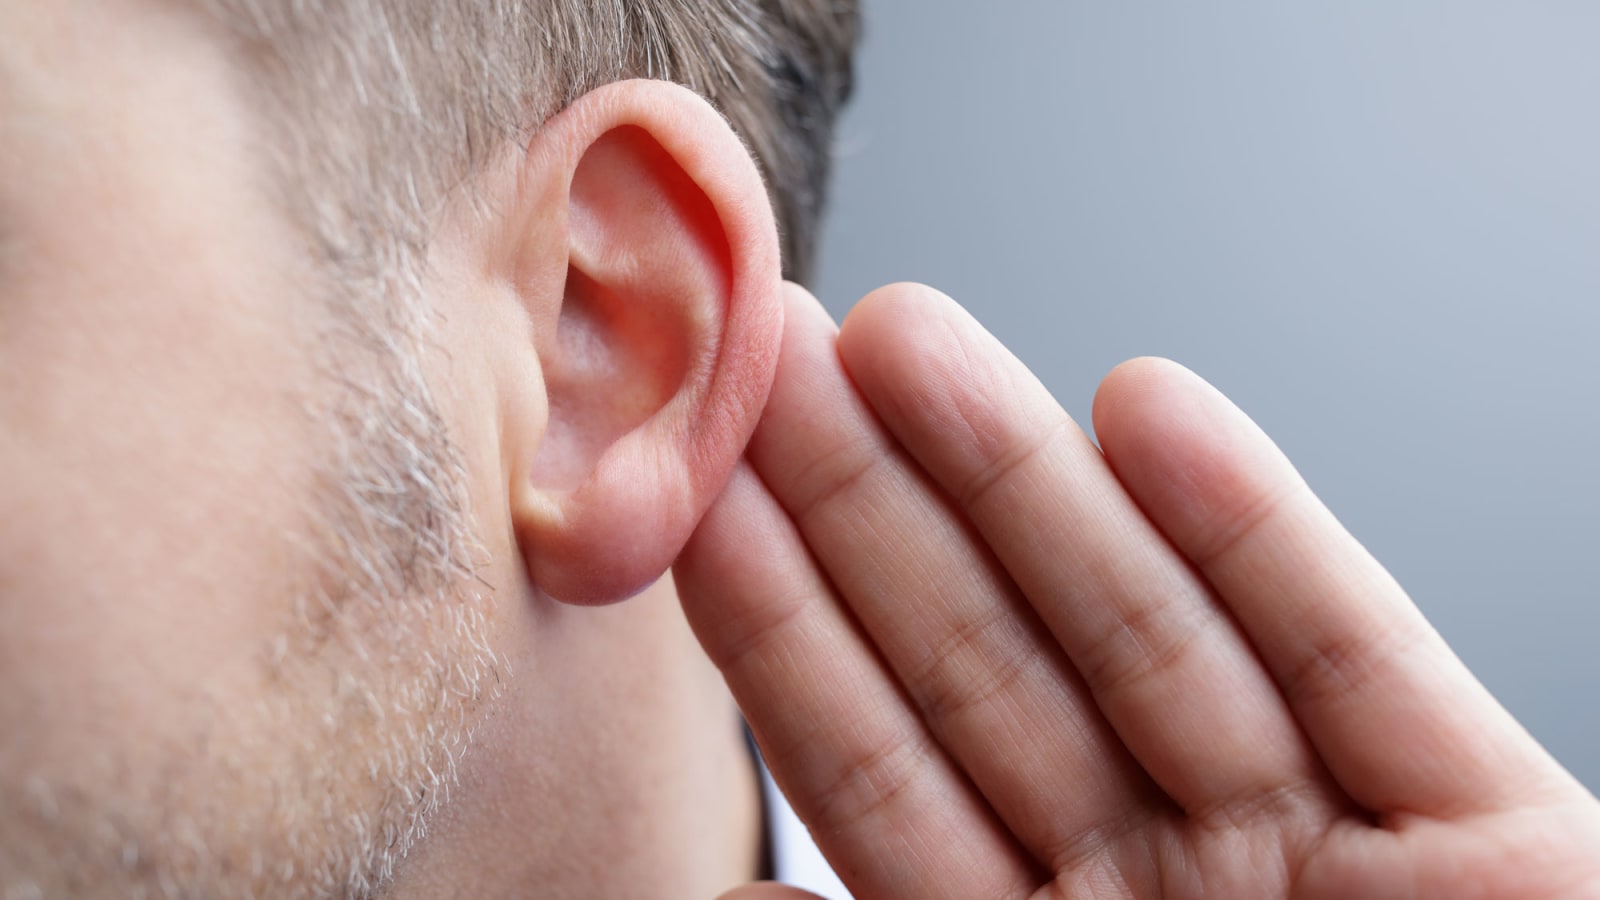 Technology That Can Help Millions With Hearing Loss